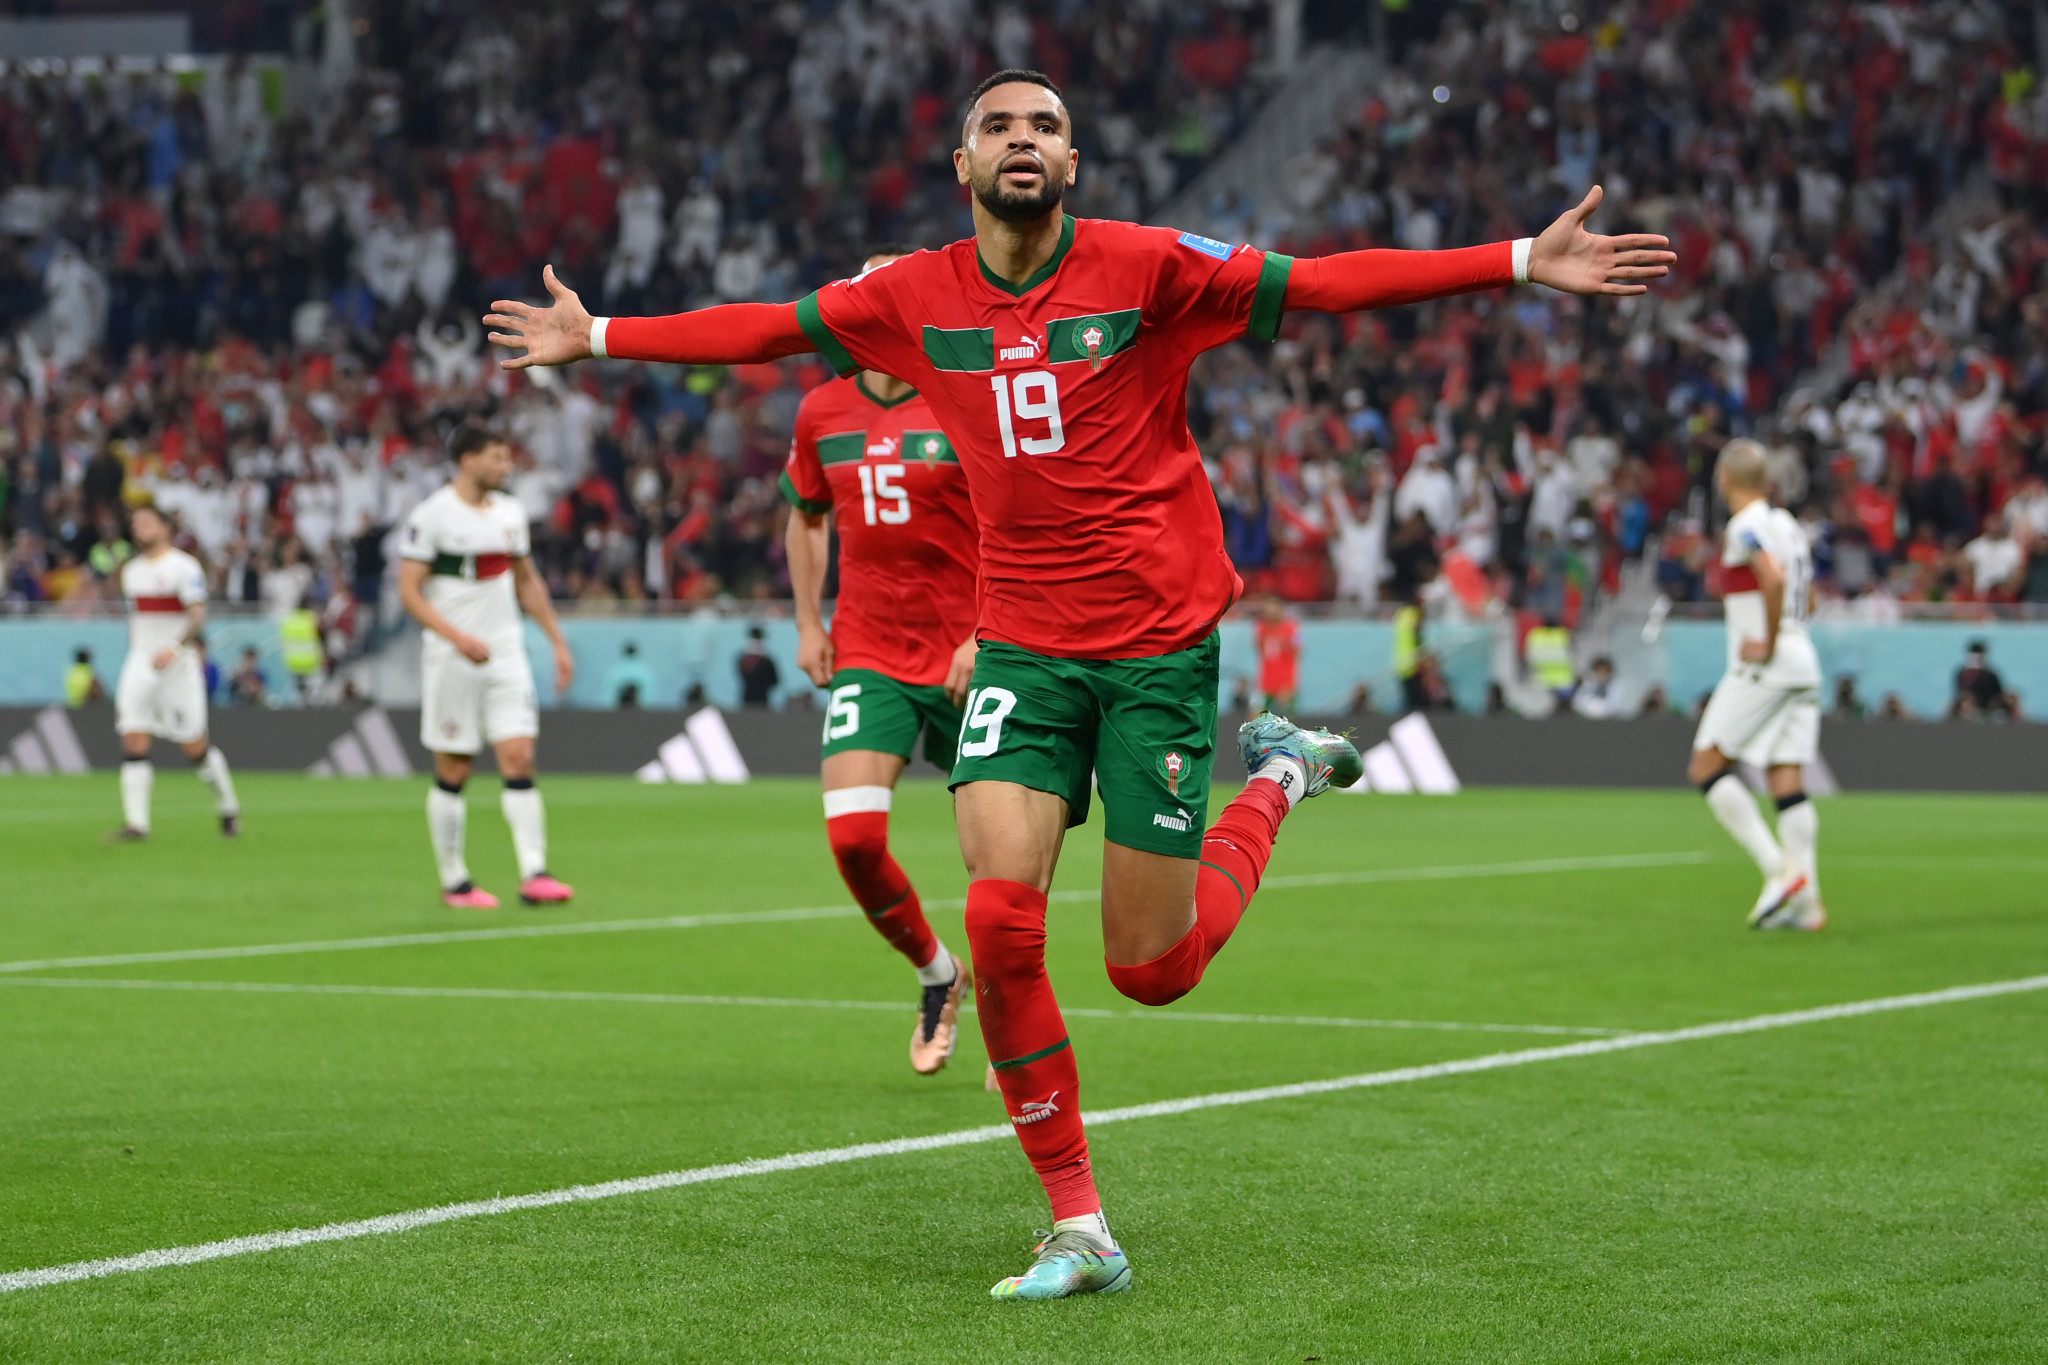 Youssef En-Nesyri scored the goal which sent Morocco to the World Cup semi-finals ©Getty Images